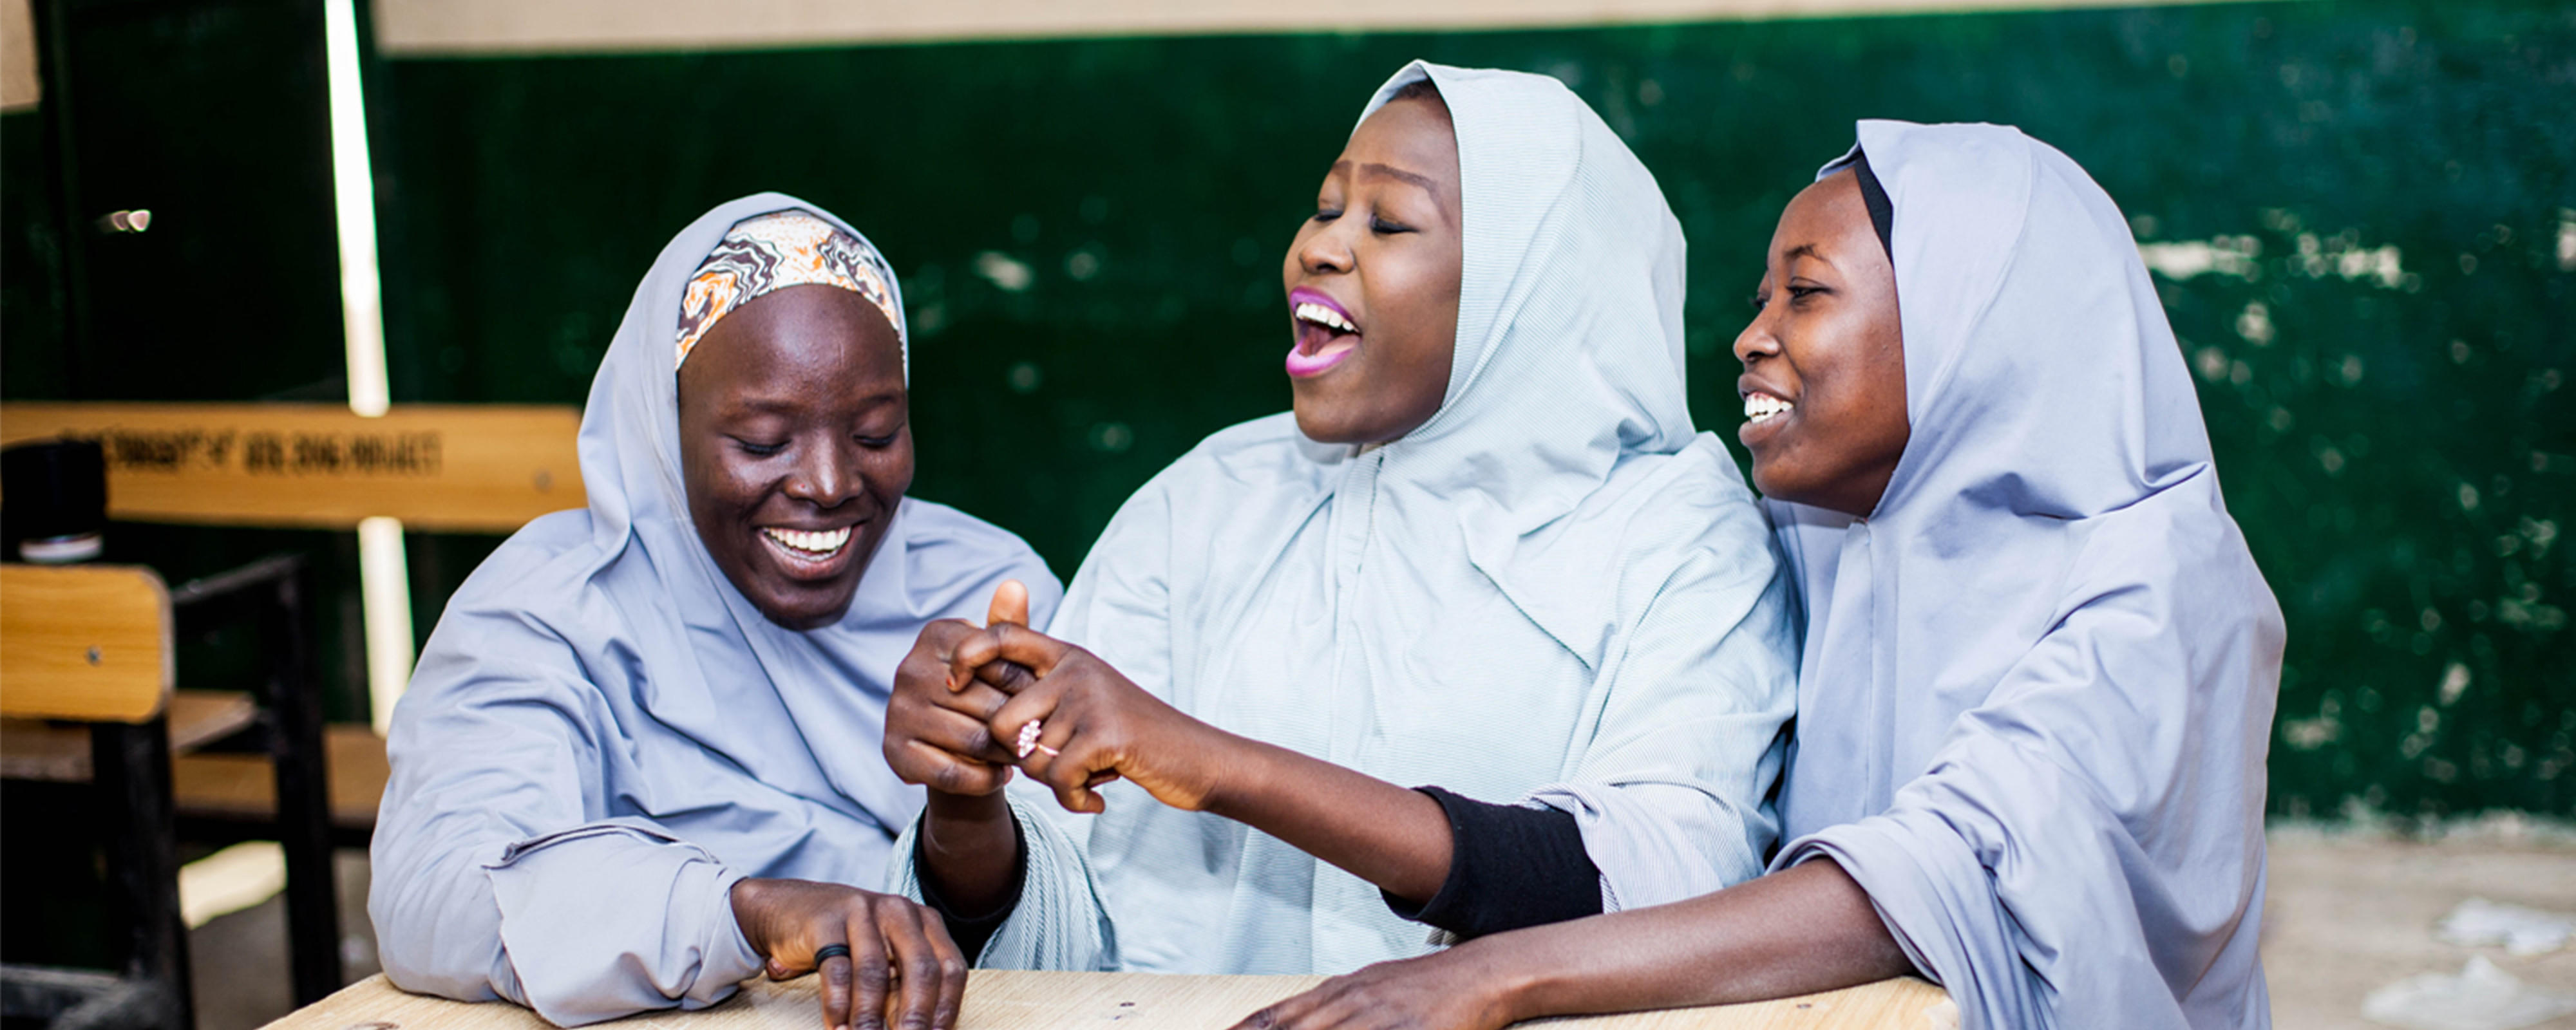 Girls learning in a classroom in Nigeria.